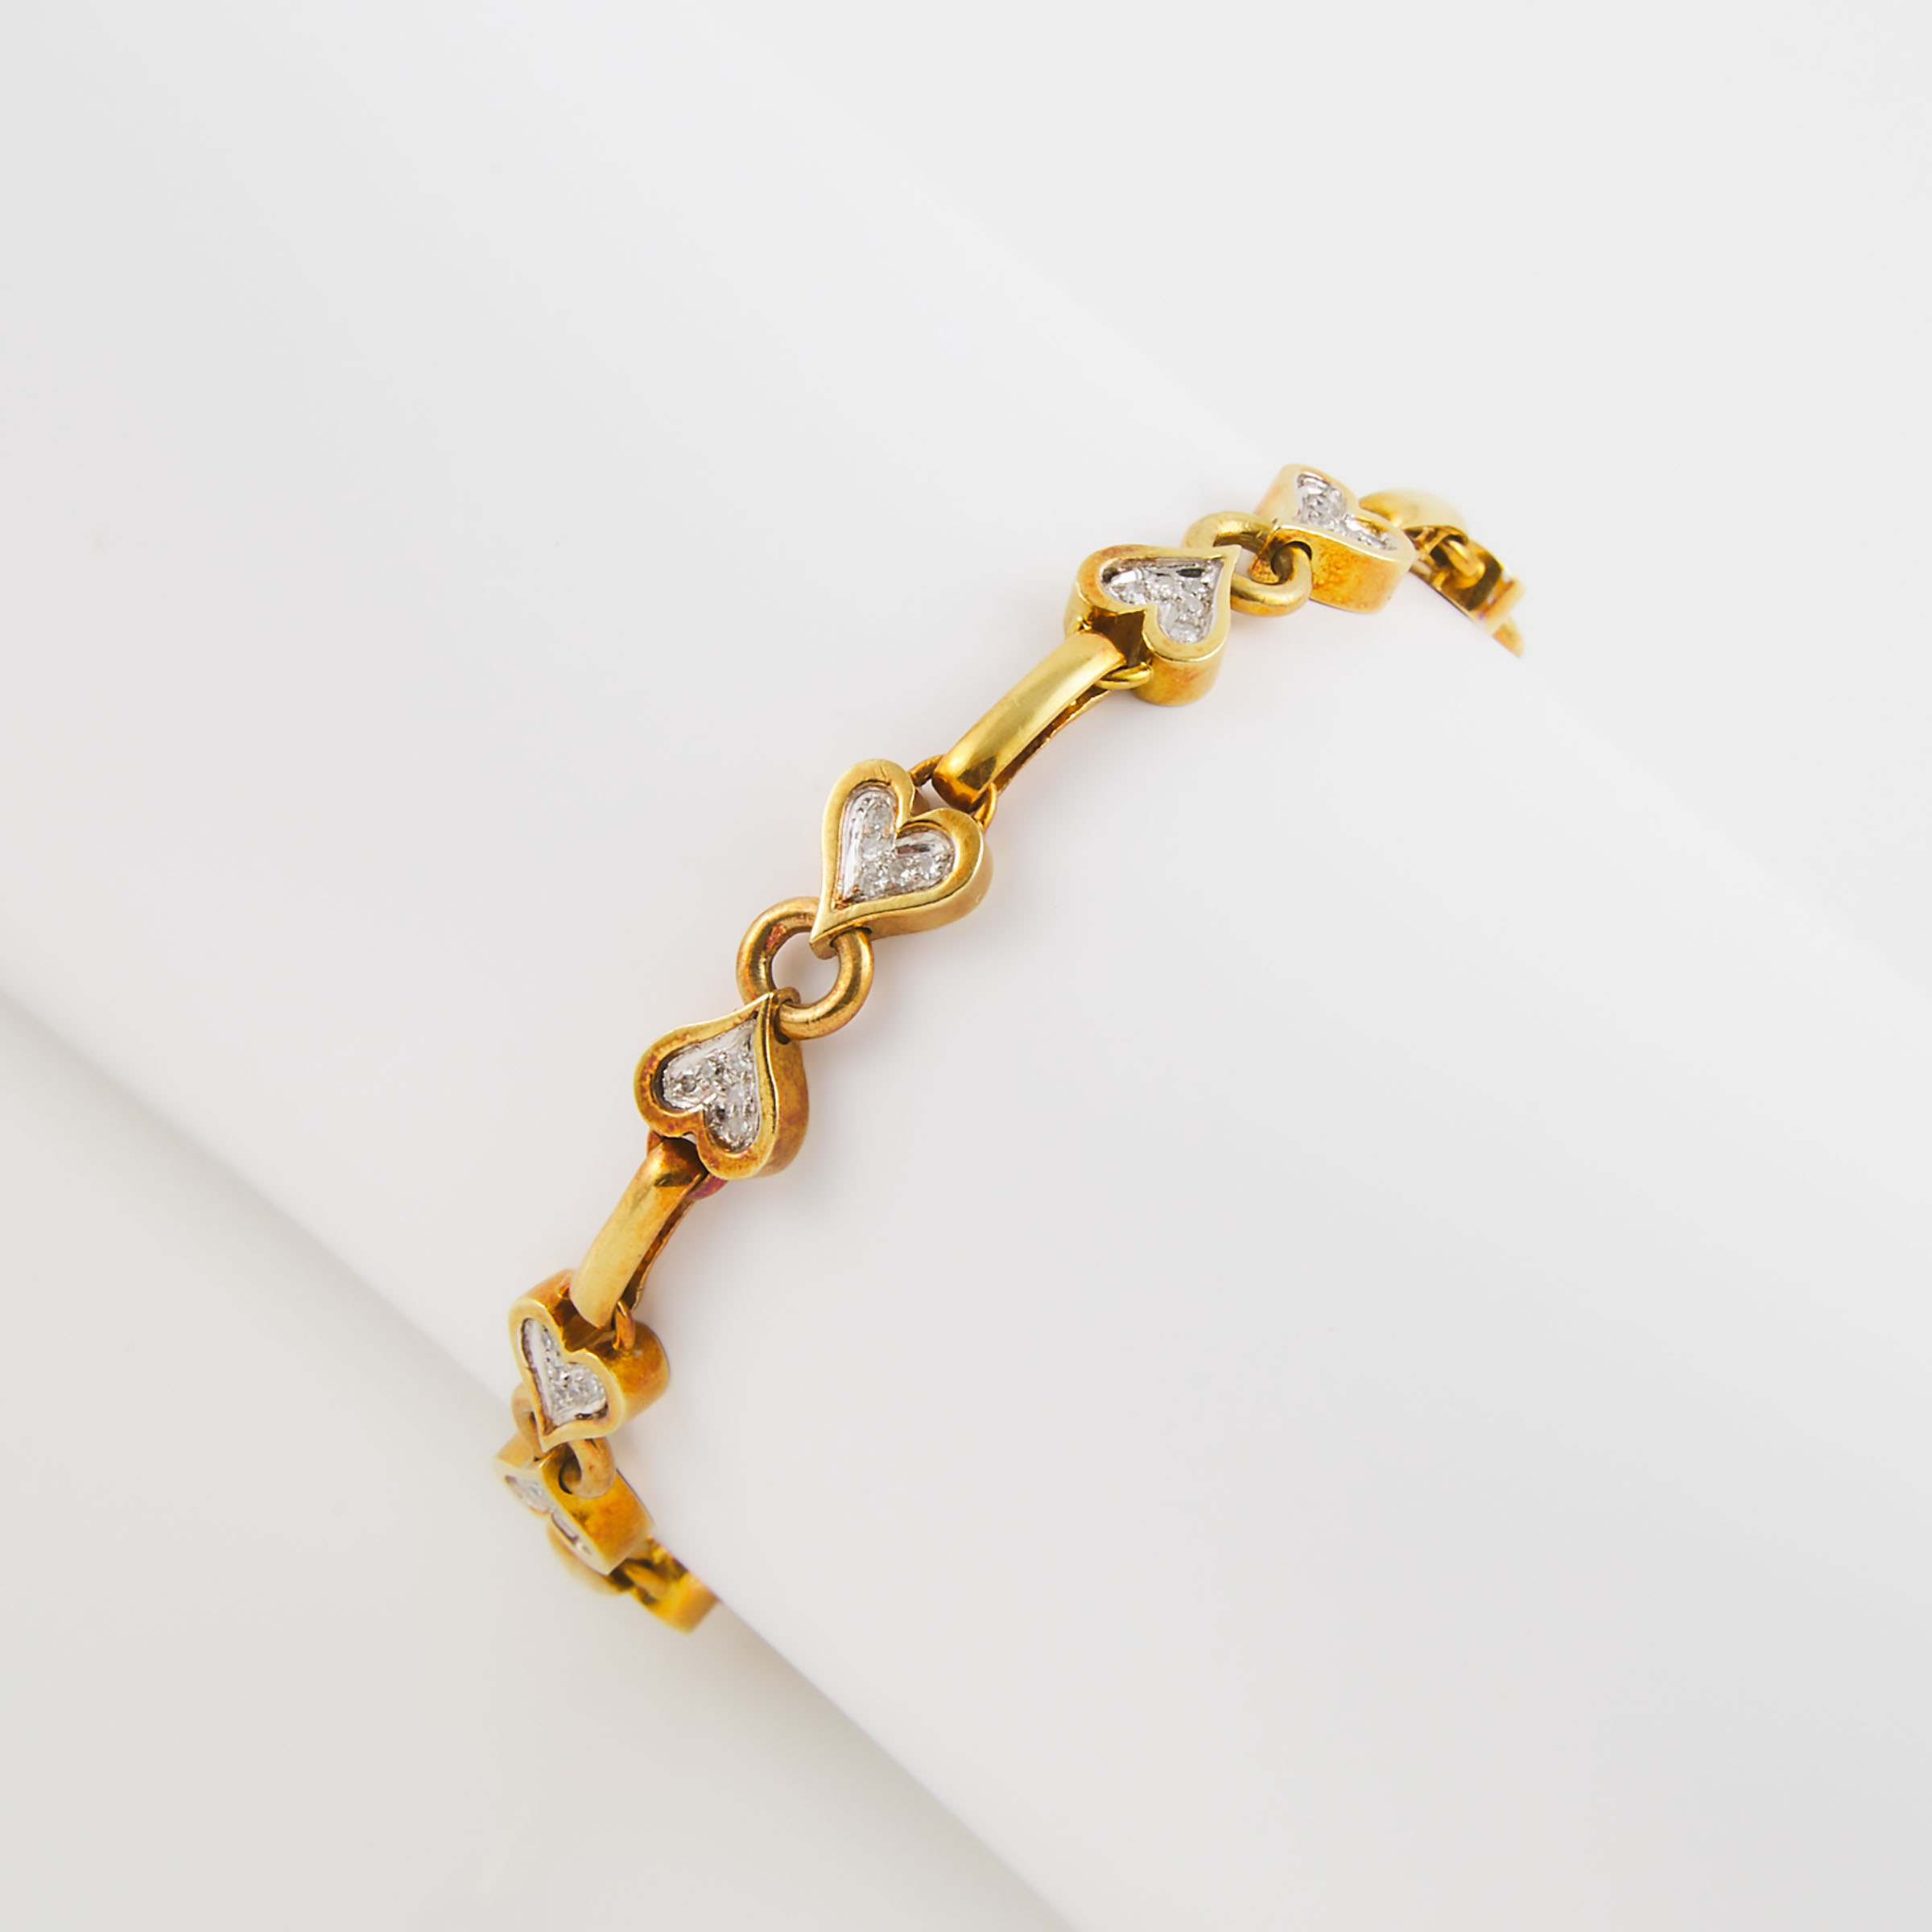 Larry's 18k Yellow And White Gold Bracelet